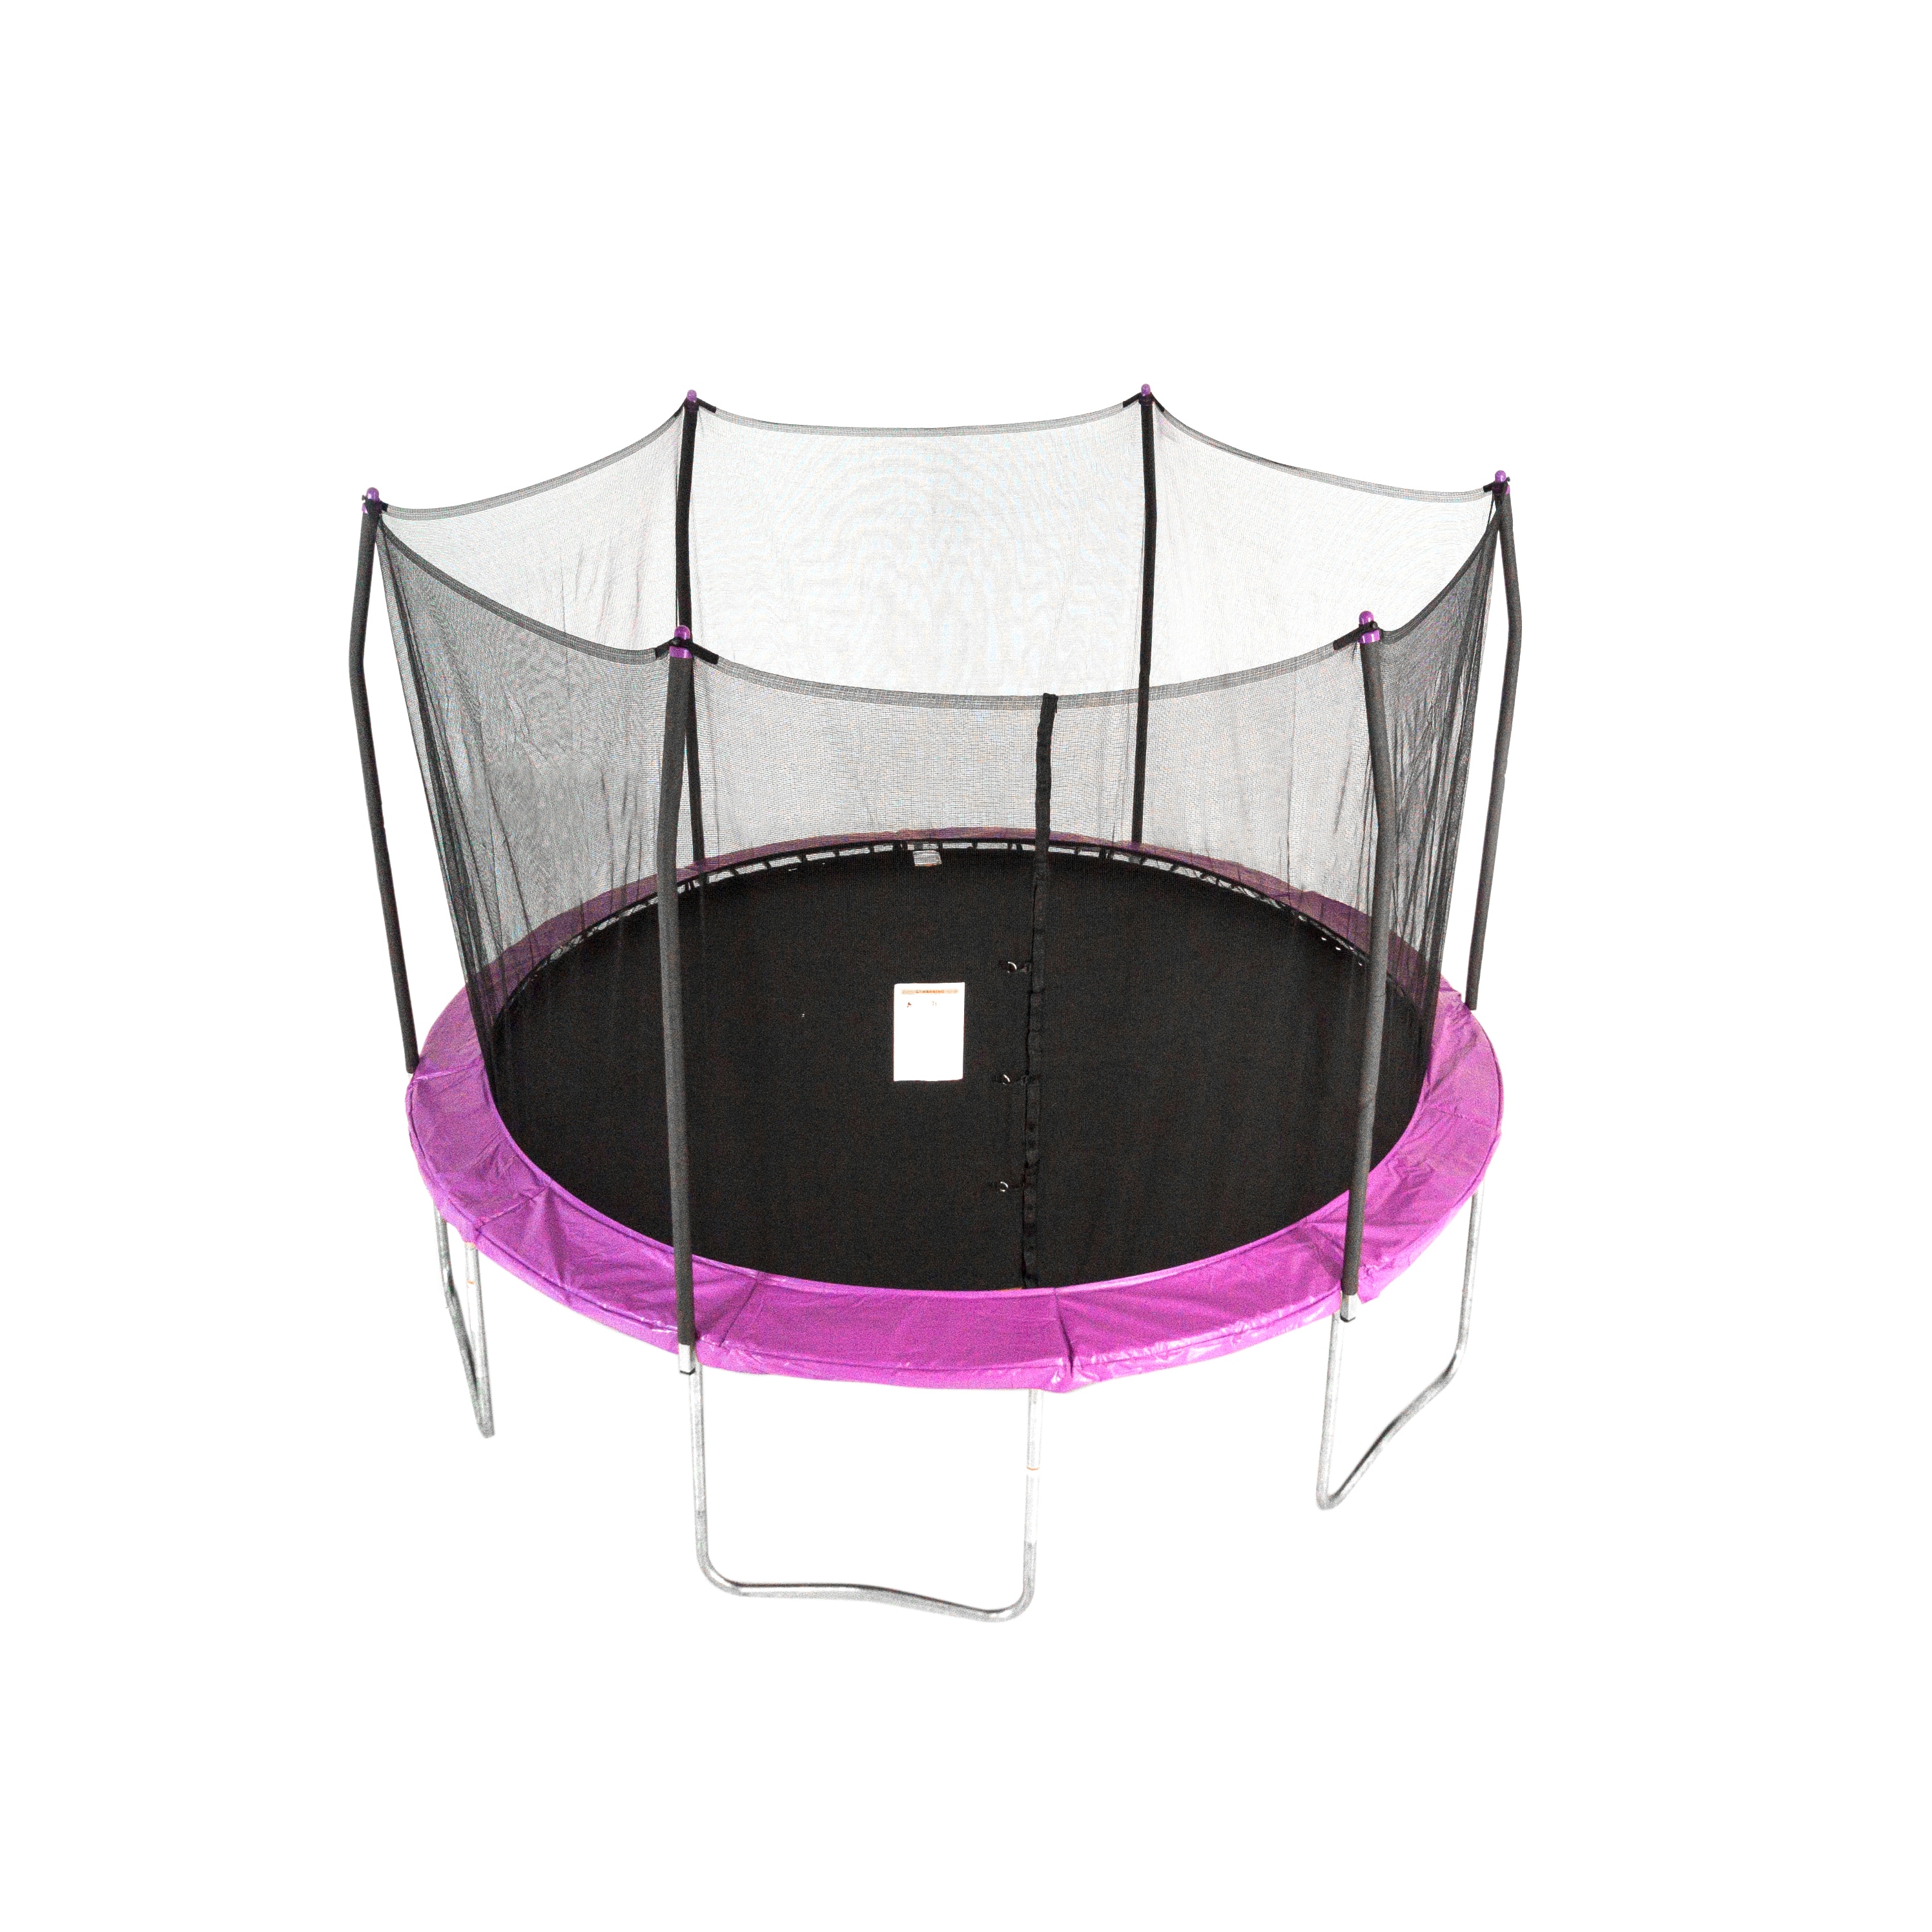 12 Ft Round Purple Trampoline with Enclosure - Heavy Duty Steel Frame, UV Protection, Stabilizing T-Sockets, 6 W-Shaped Legs | - Skywalker STEC12P.2